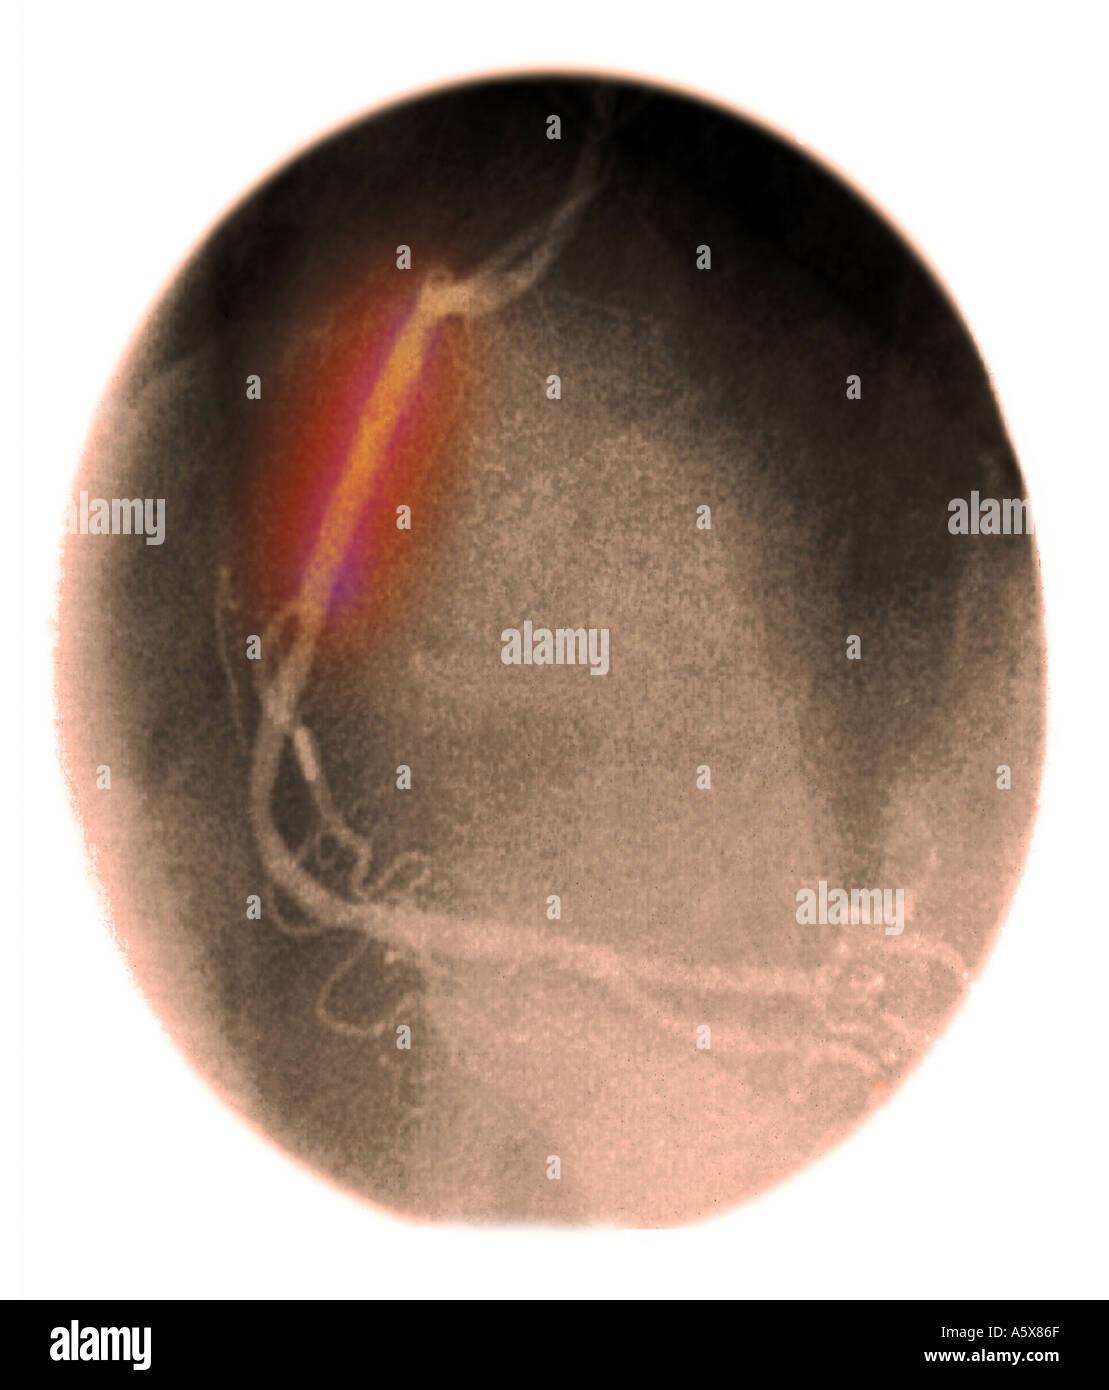 colorized xray of a coronary angiogram showing a stent placed in the right coronary artery to open an area of blockage  Stock Photo